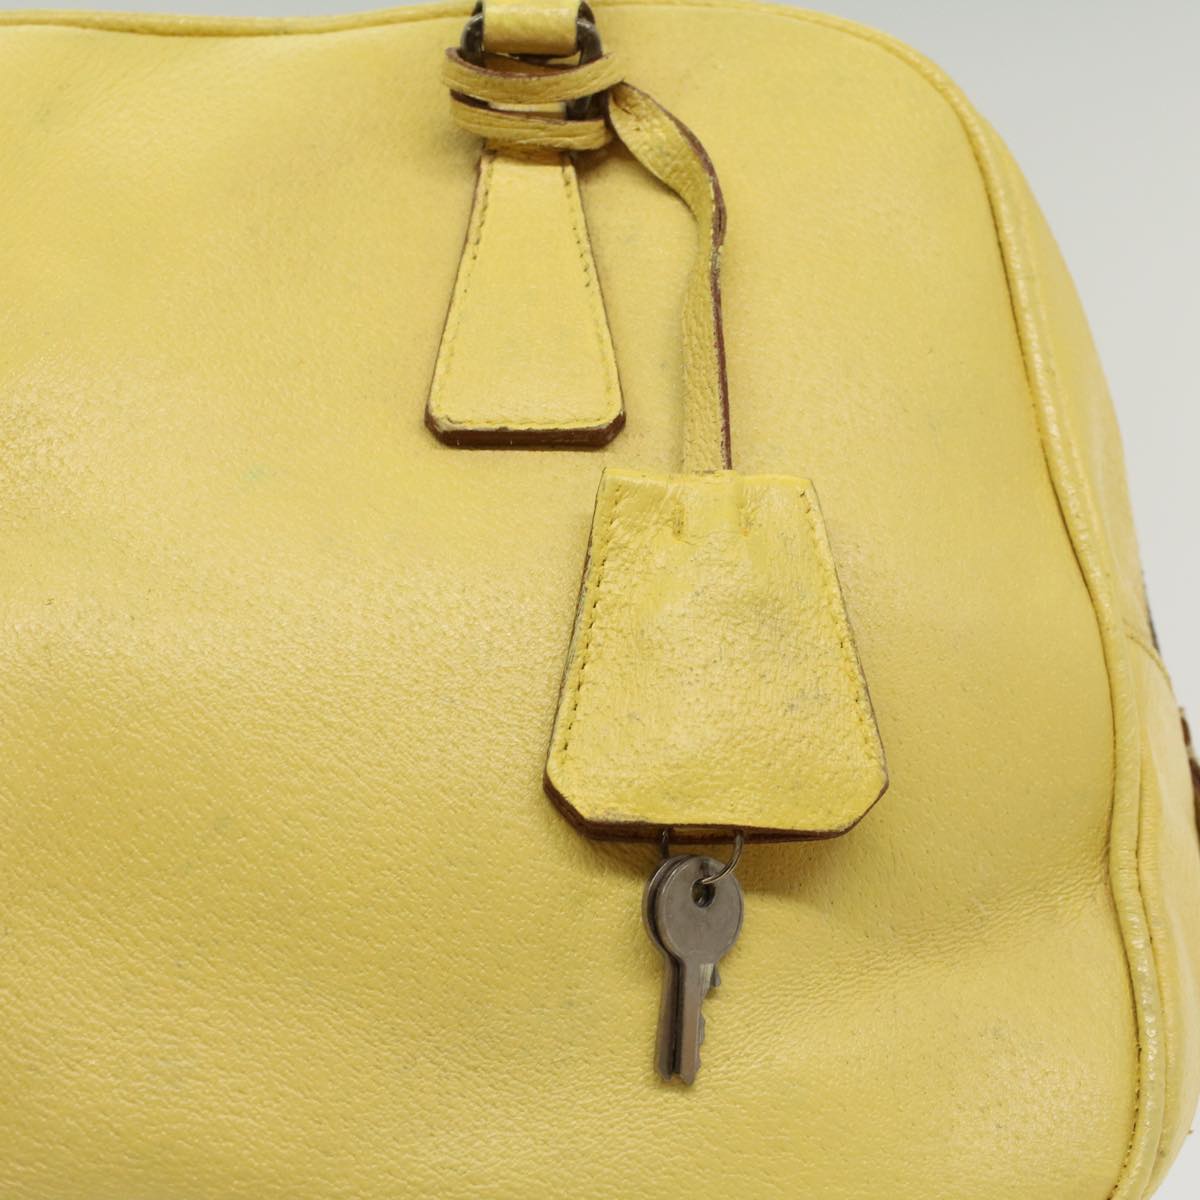 PRADA Hand Bag Leather Yellow Auth cl744